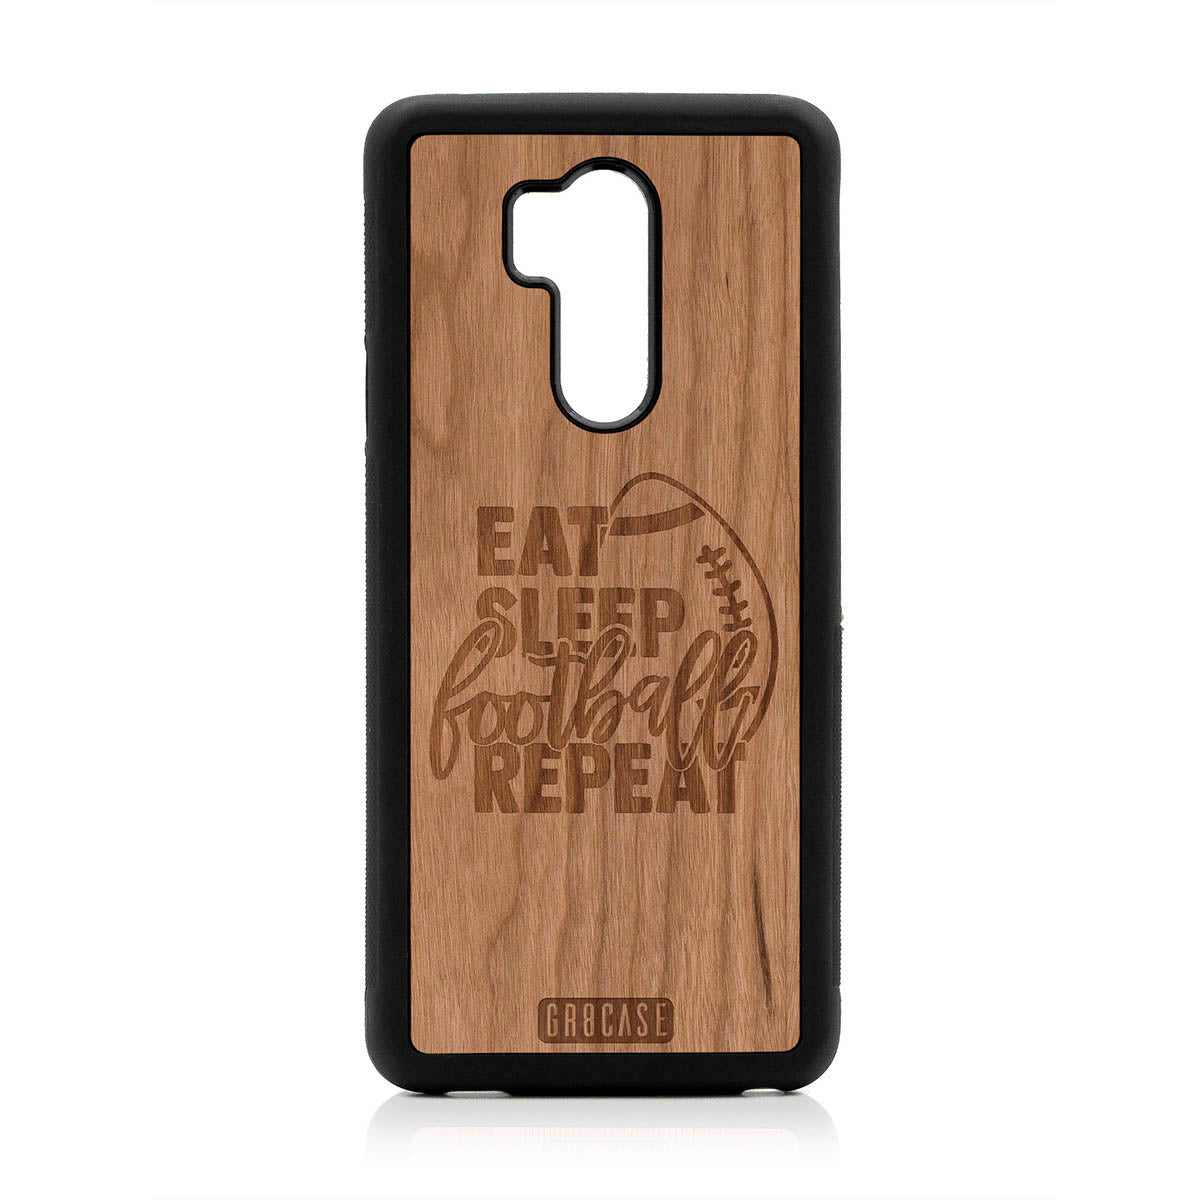 Eat Sleep Football Repeat Design Wood Case For LG G7 ThinQ